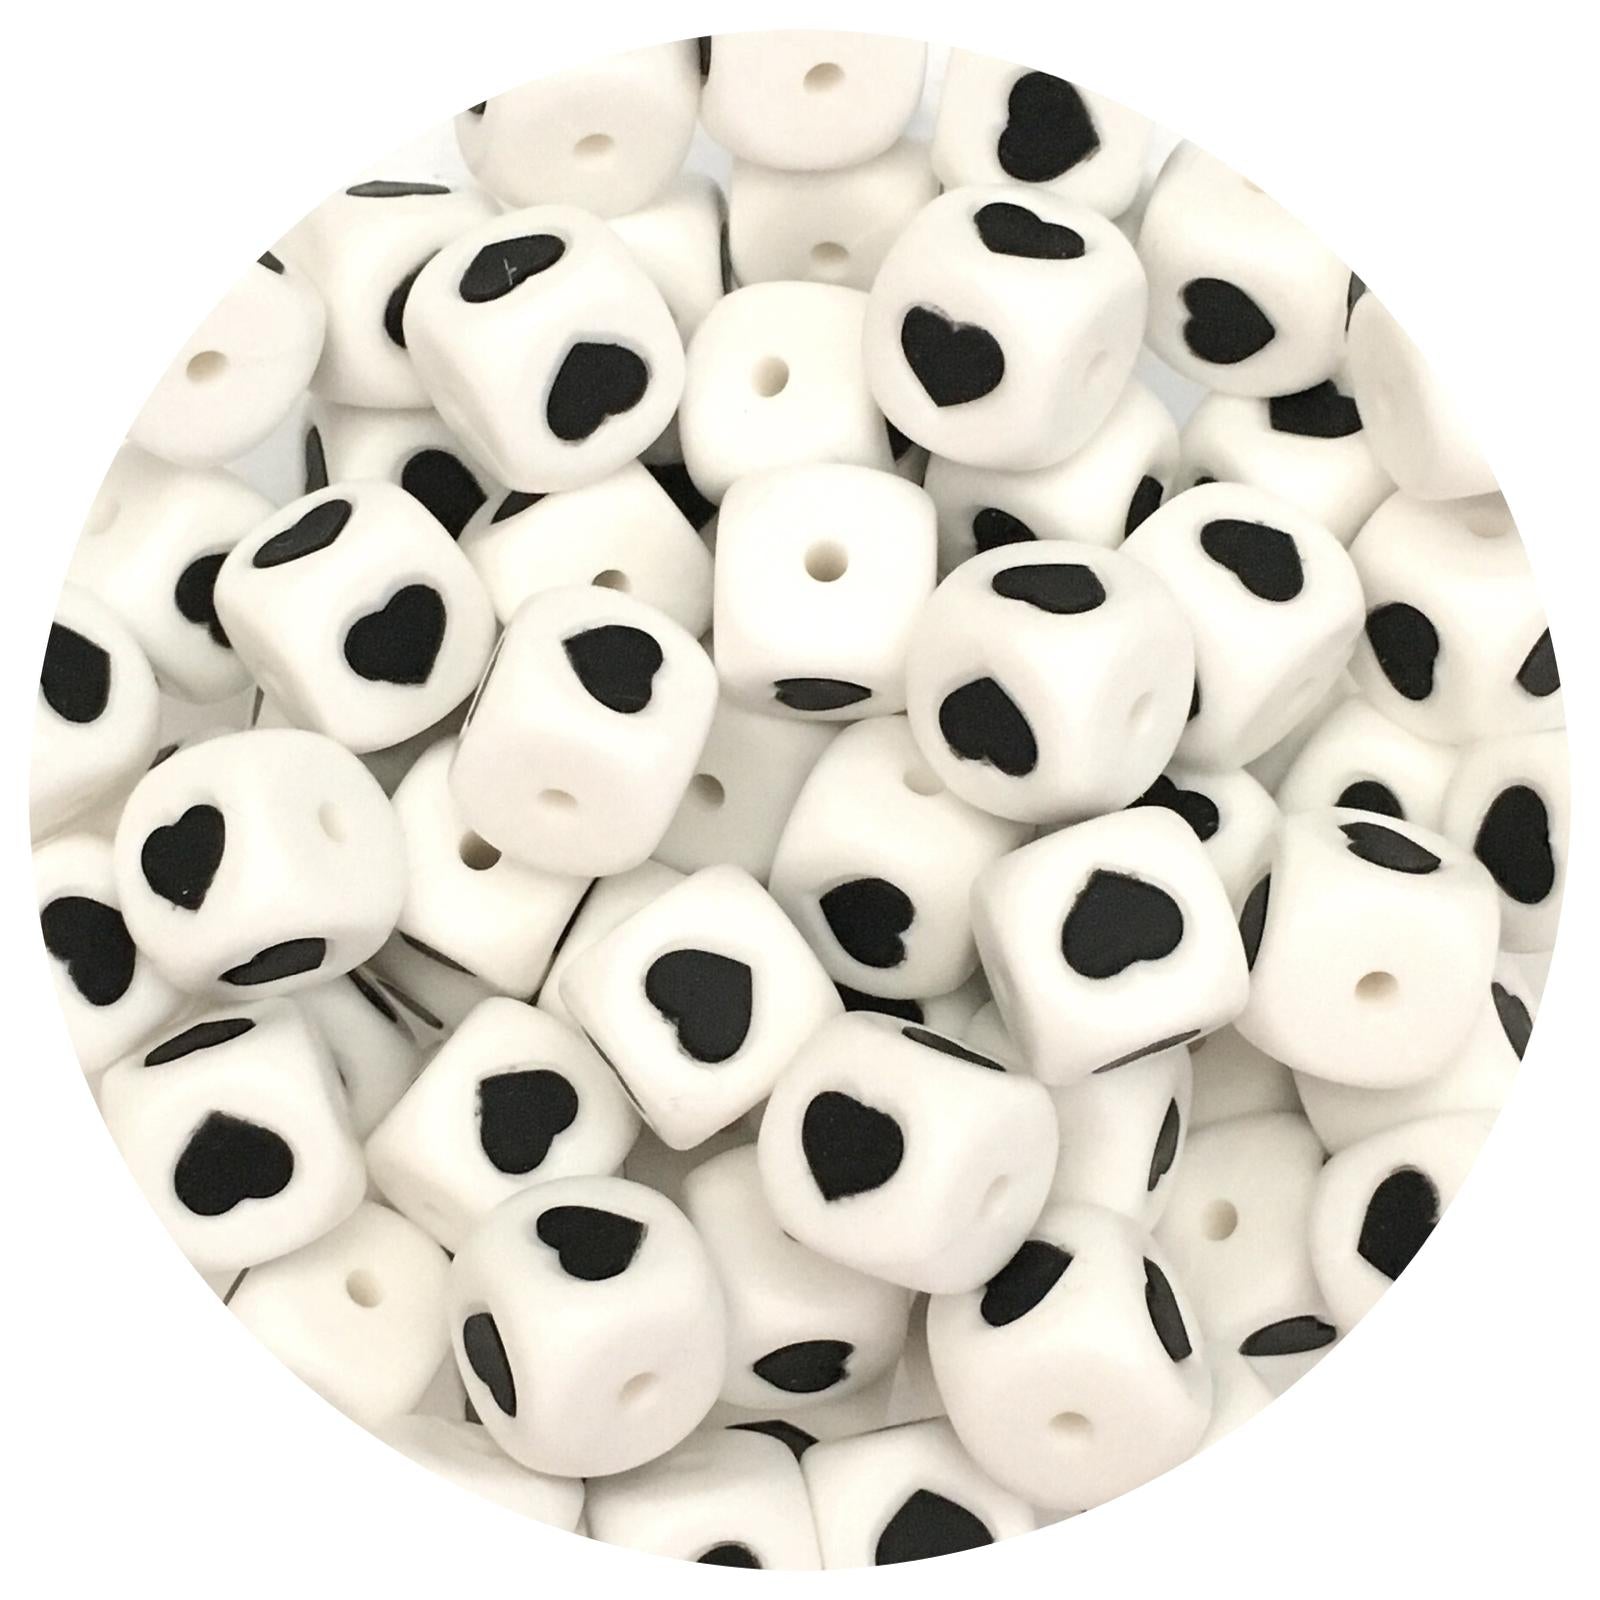 12mm Silicone Love Heart Cube Beads - 5 Beads